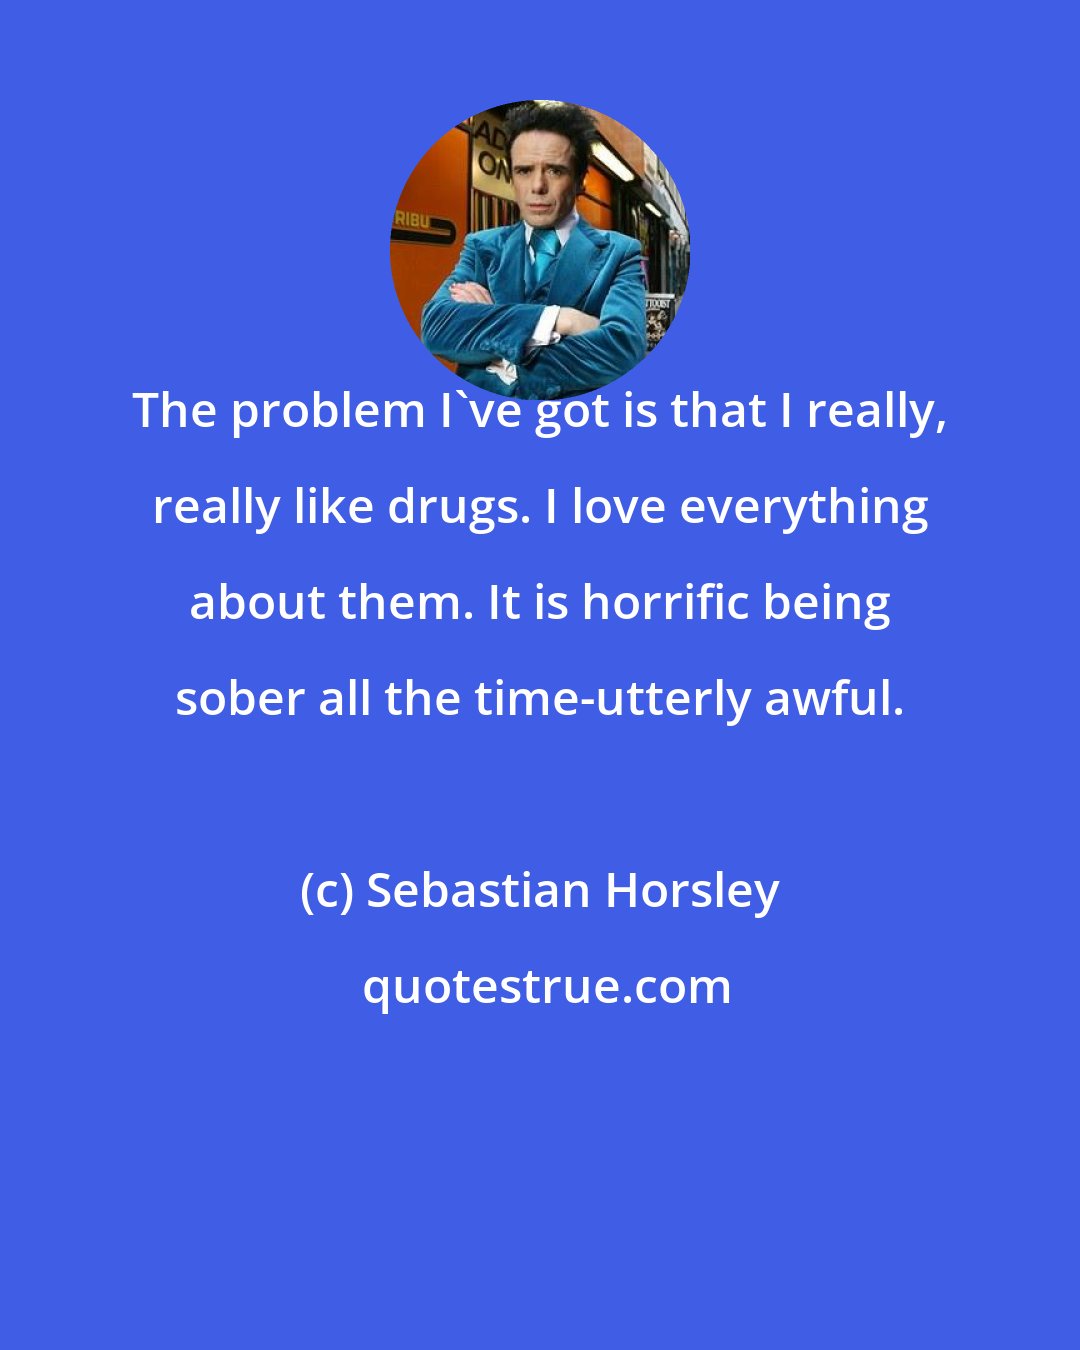 Sebastian Horsley: The problem I've got is that I really, really like drugs. I love everything about them. It is horrific being sober all the time-utterly awful.